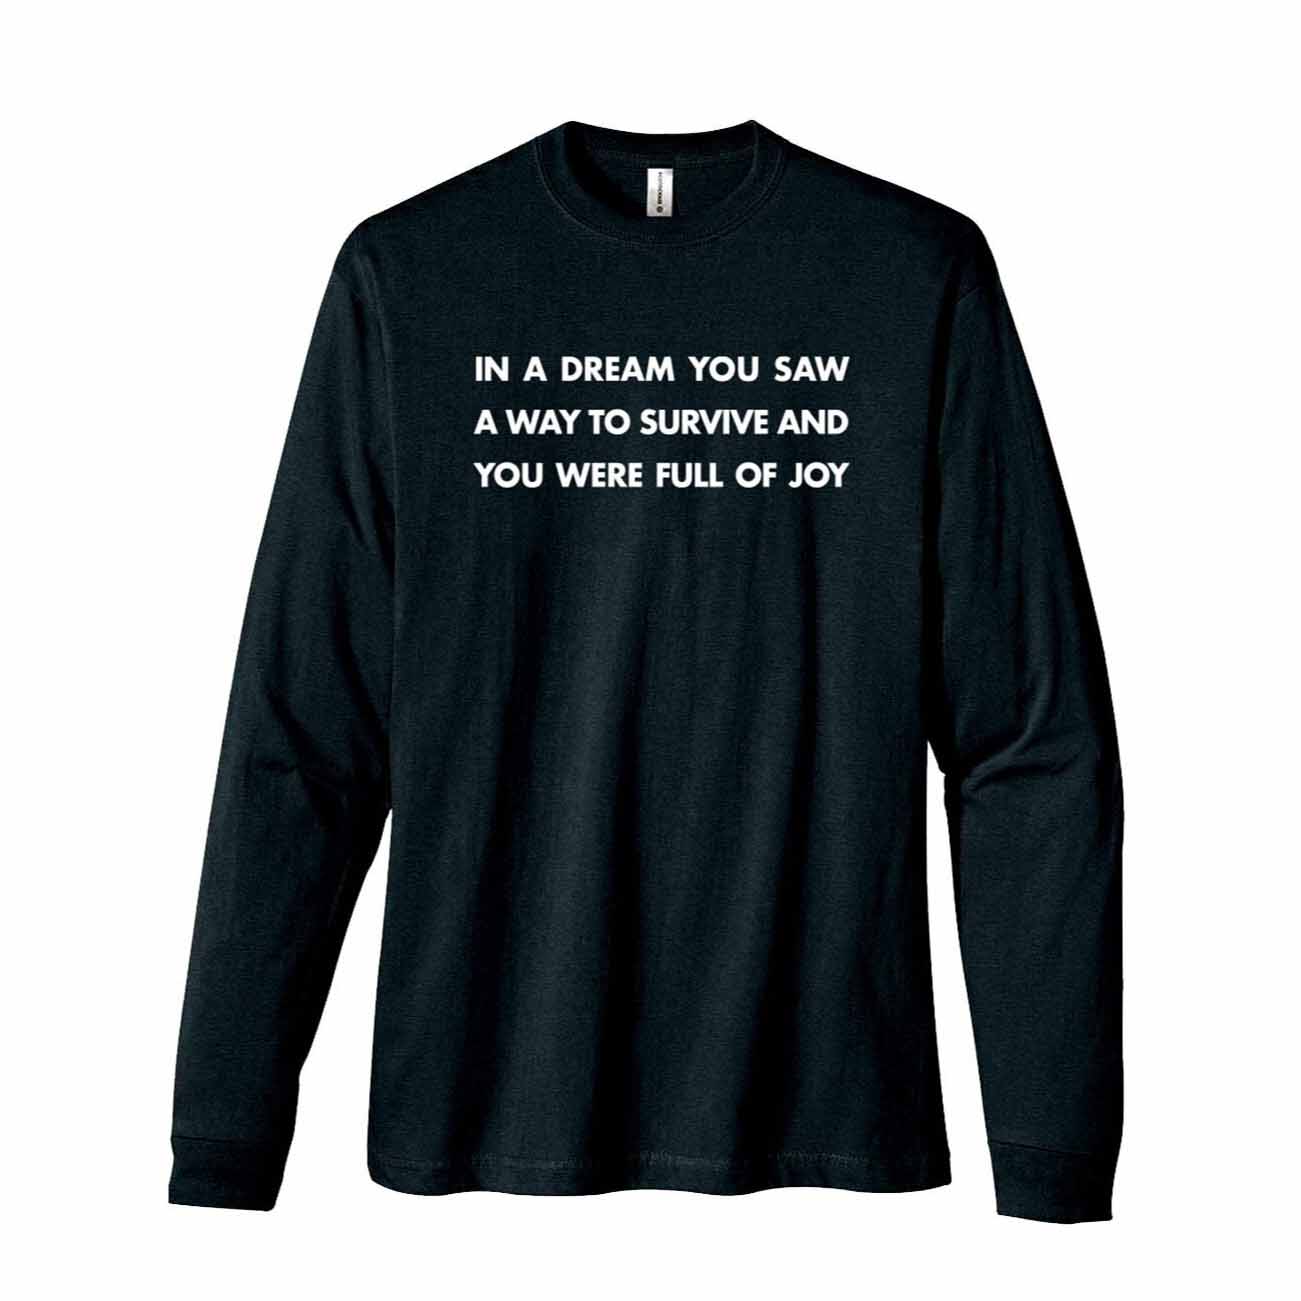 IN A DREAM YOU SAW A WAY TO SURVIVE AND YOU WERE FULL OF JOY long sleeve black t-shirt